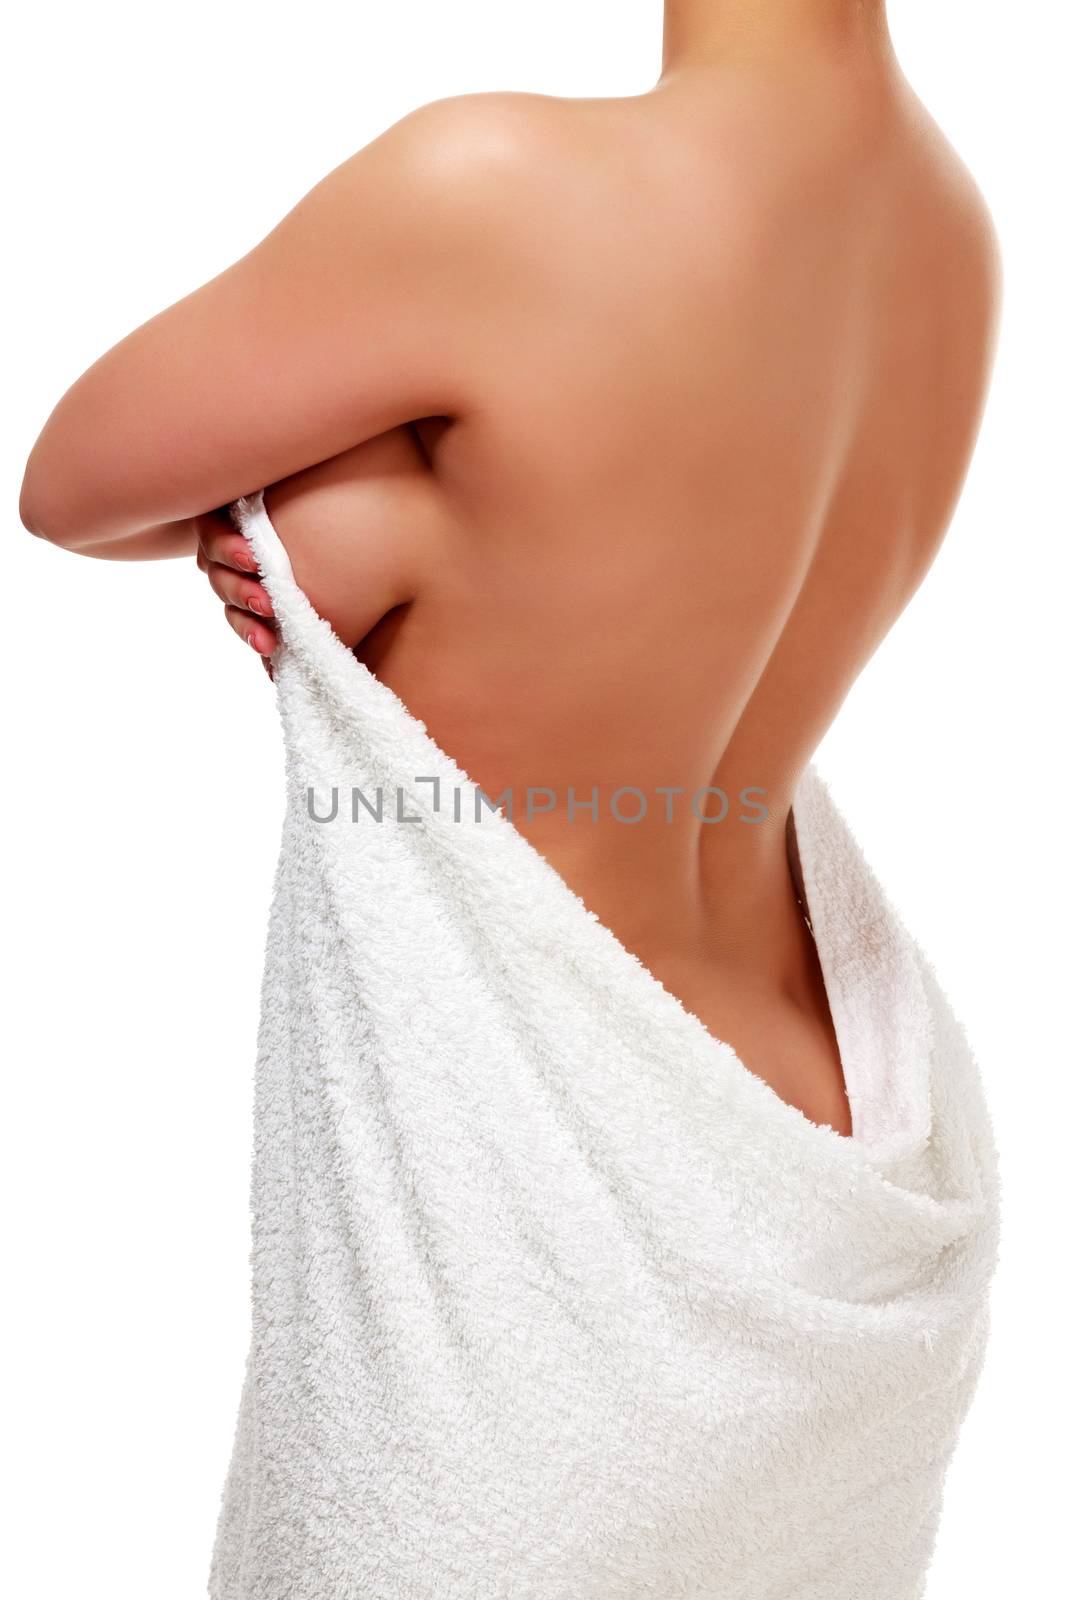 Woman in white towel, naked back, smooth skin, isolated on white background